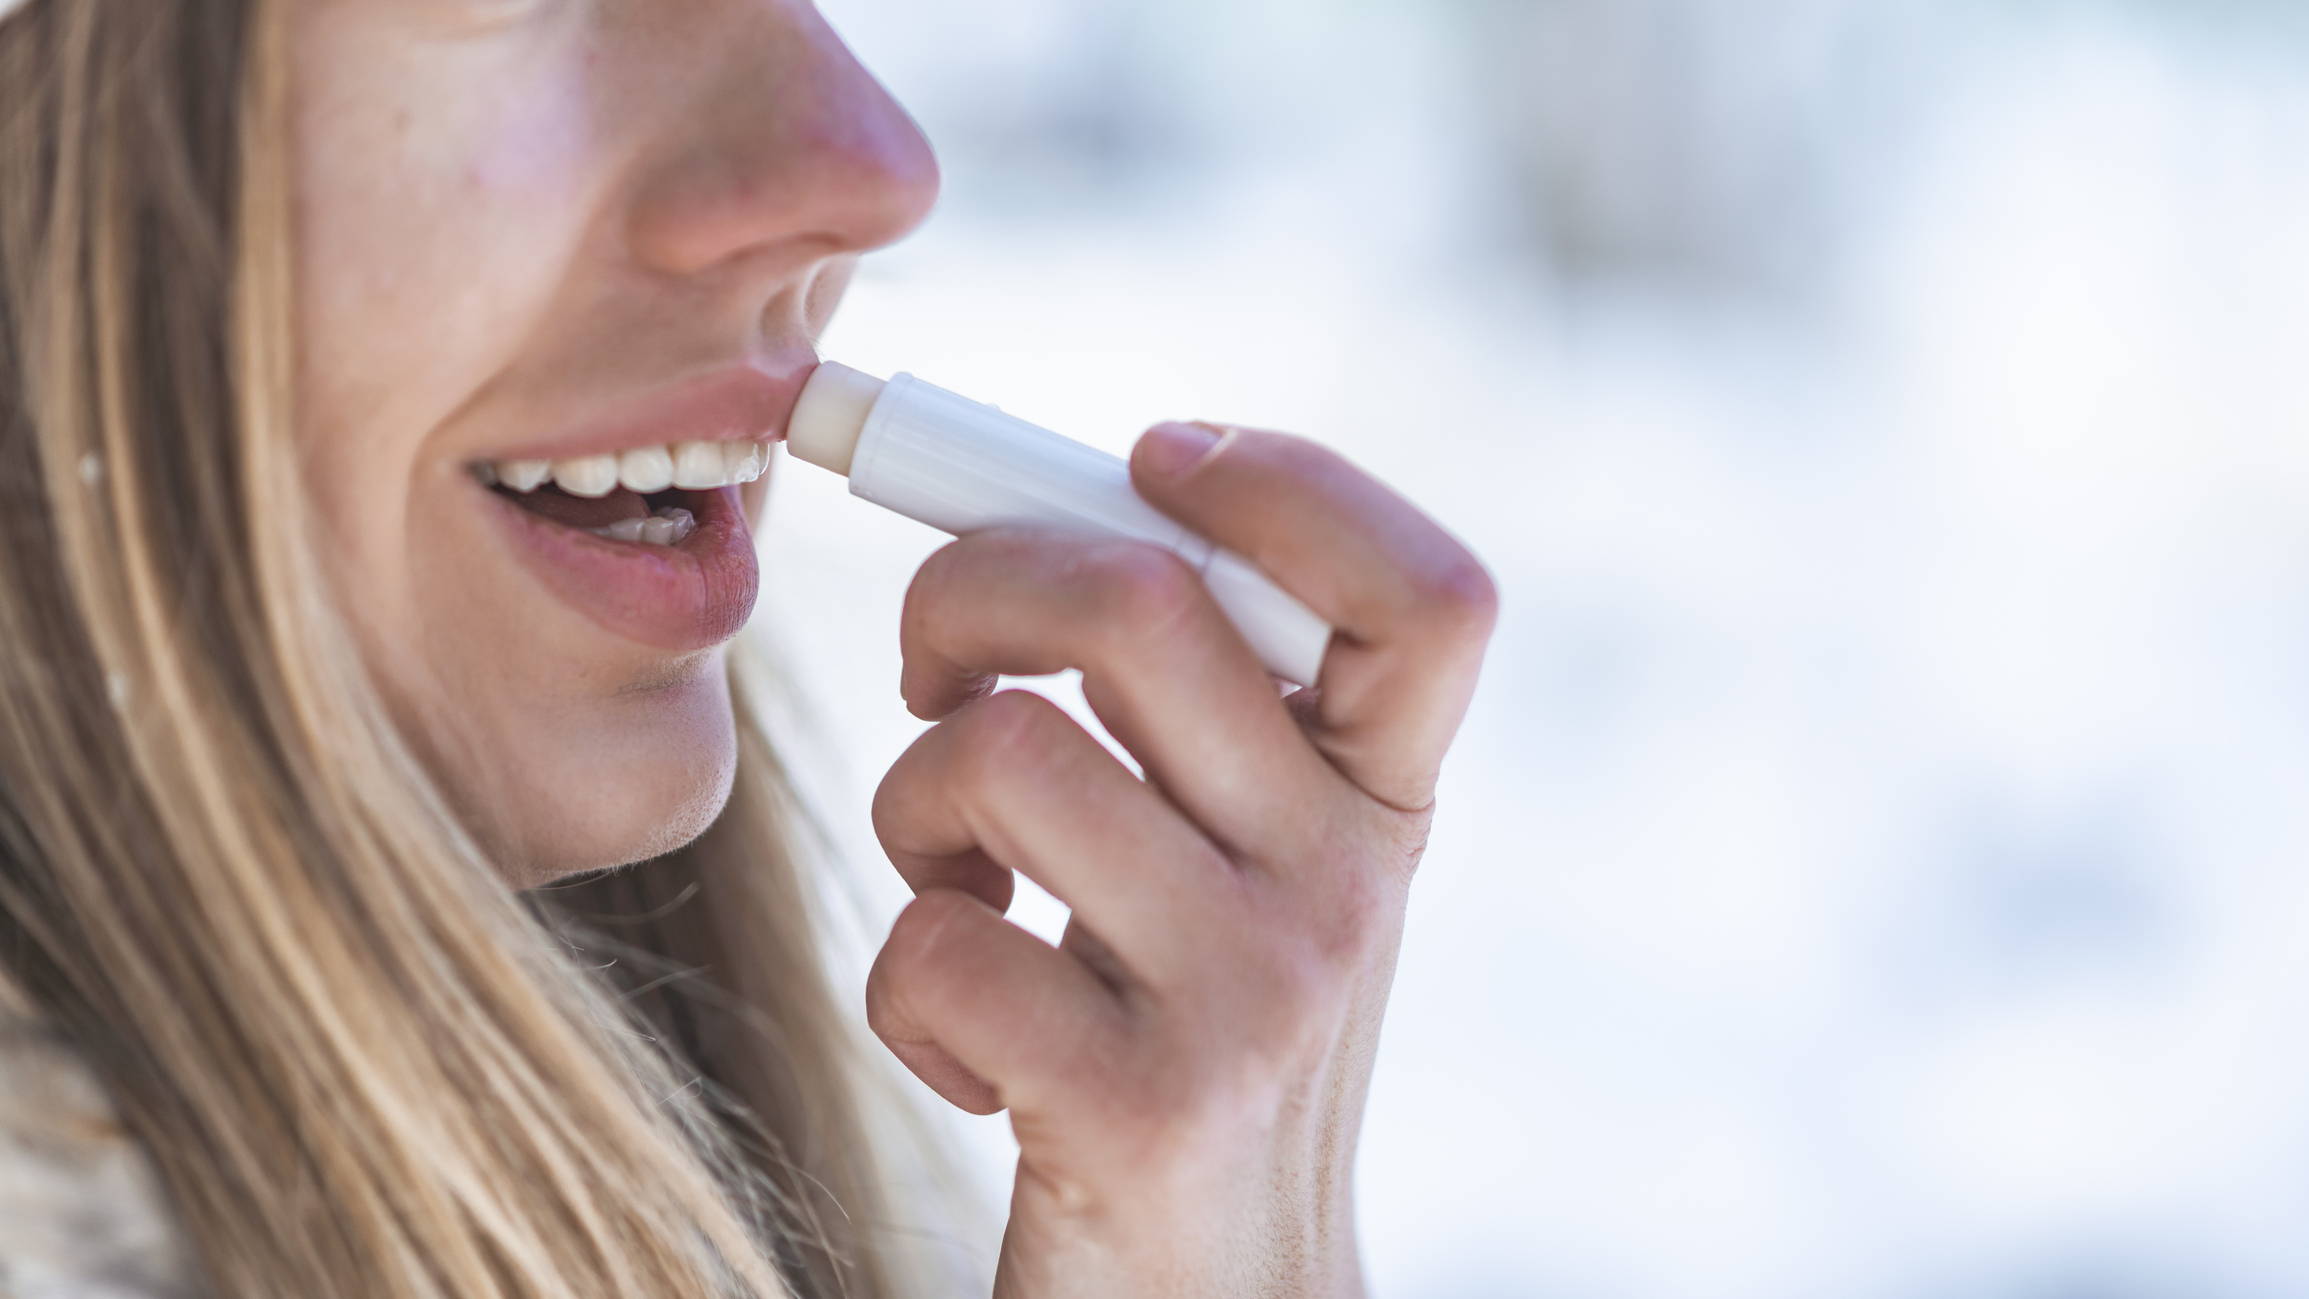 Lip balm could help cut down on the spread of viruses